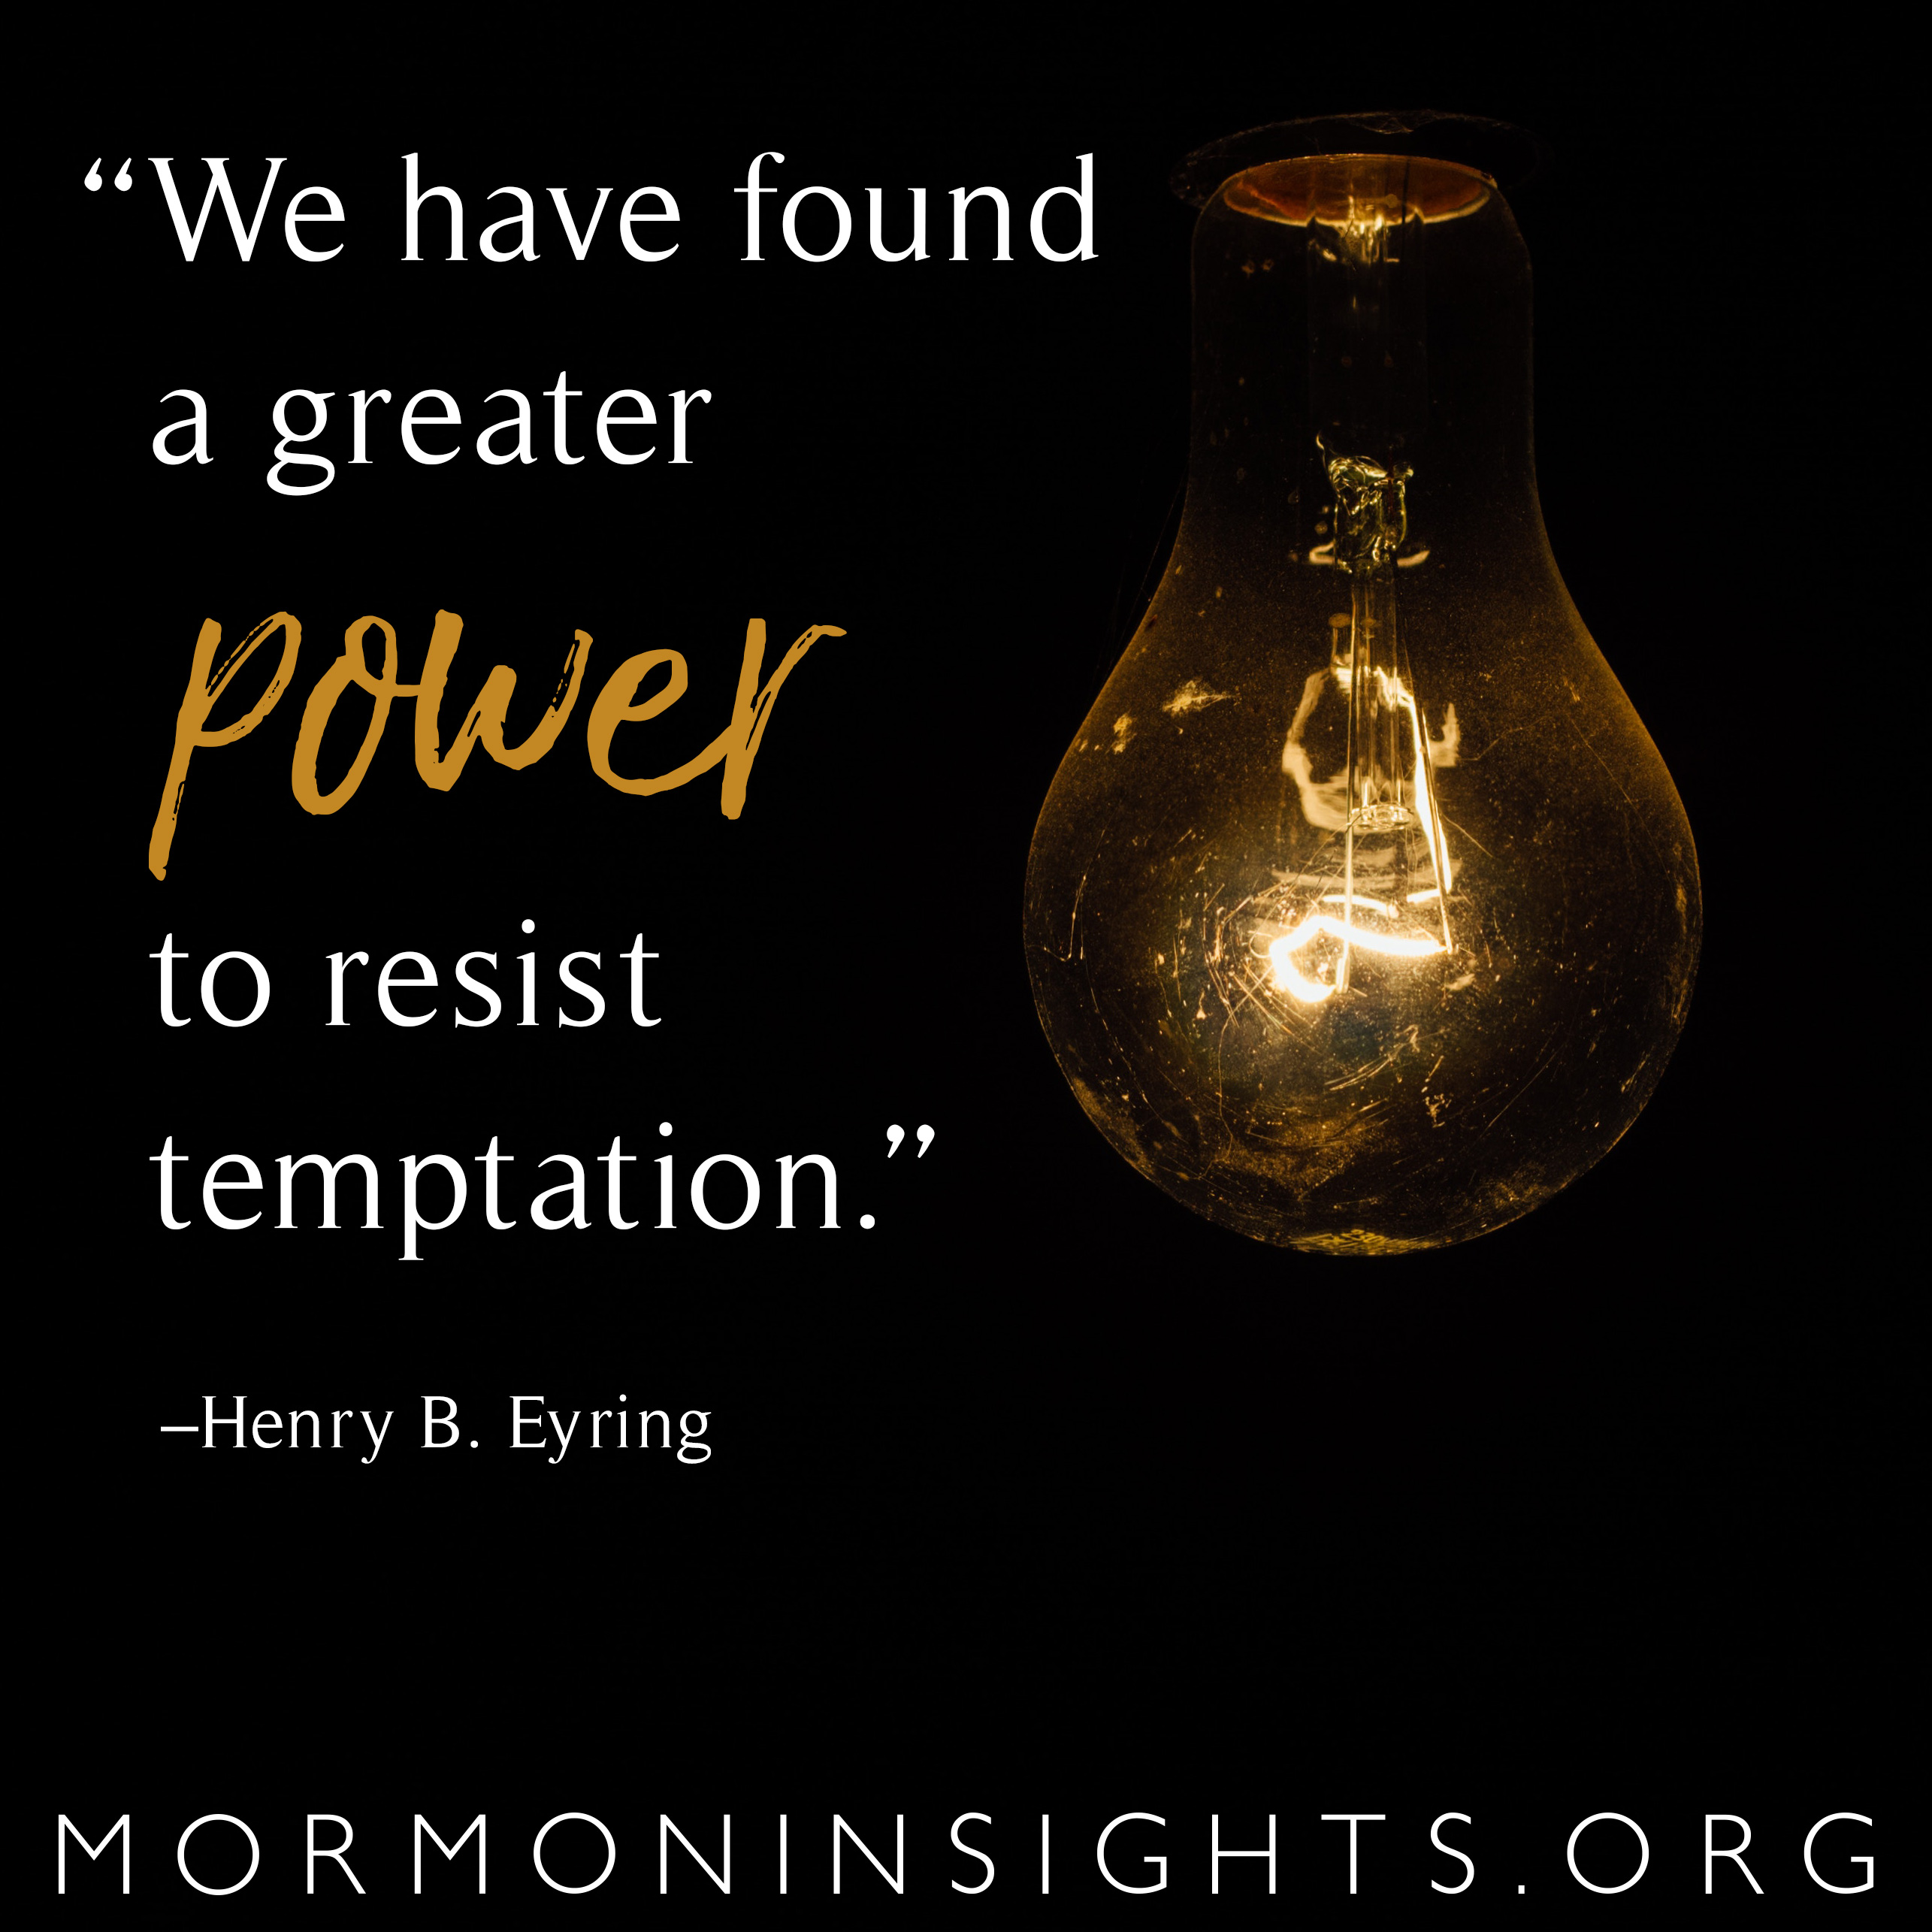 "We have found a greater power to resist temptation." —Henry B. Eyring